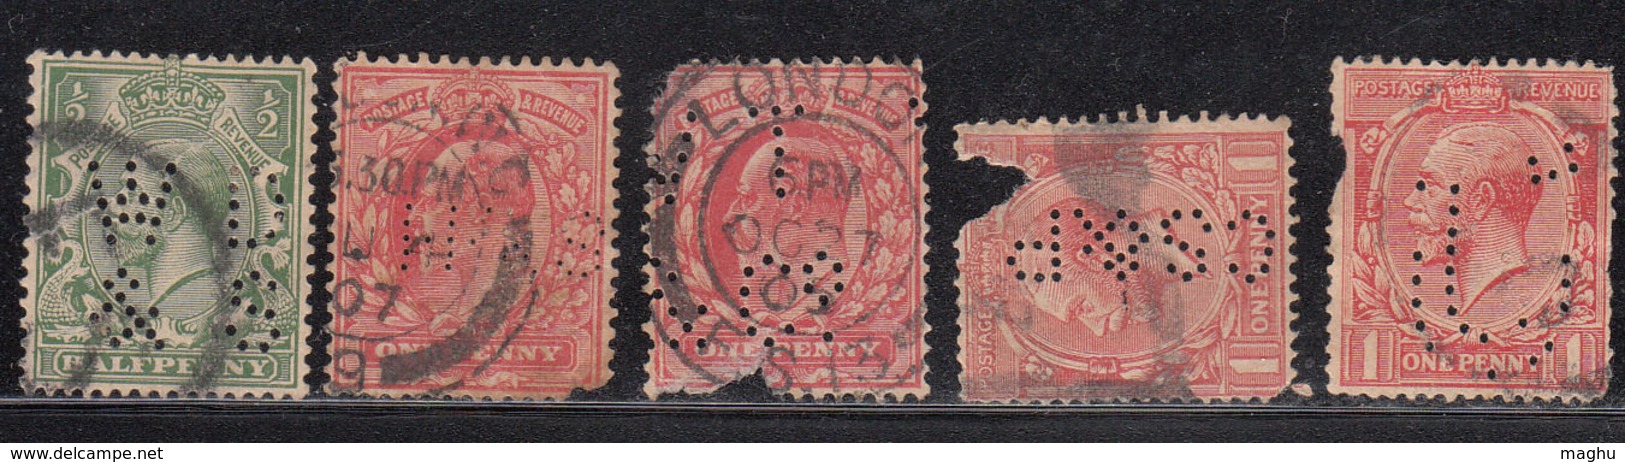 5 Diff Perfins / Perfin, KGV Series, Great Britain Used, - Perfins